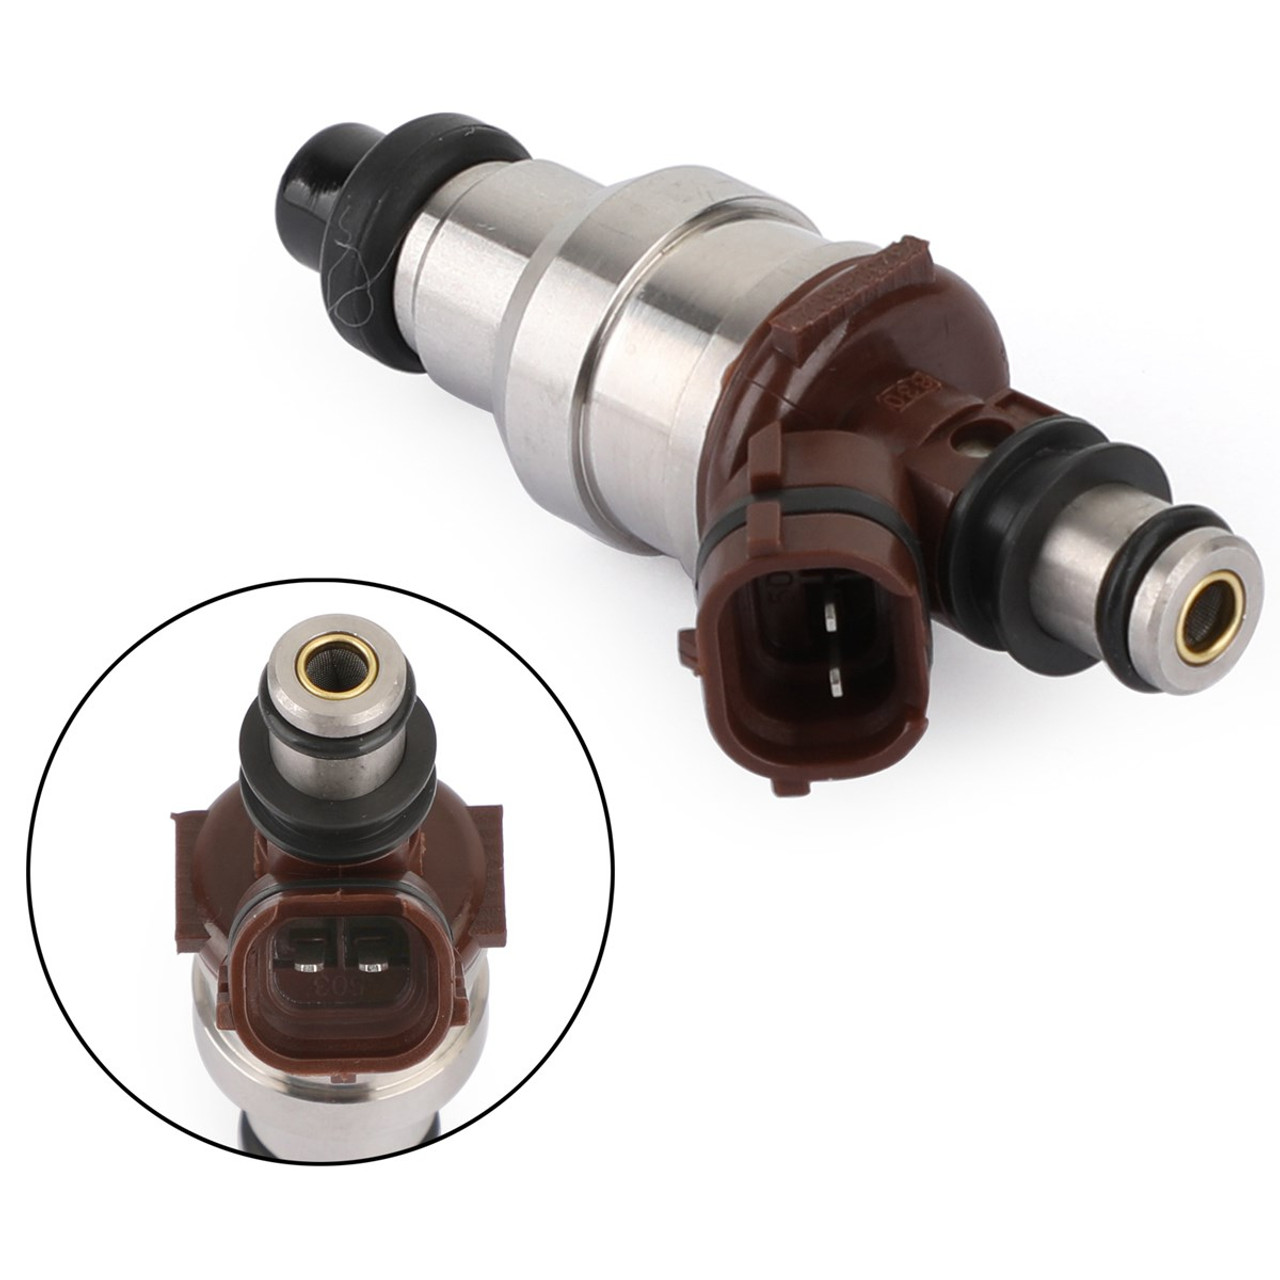 6PCS Fuel Injectors Fit For TOYOTA 4RUNNER PICKUP 89-95 T100 93-94 Brown 23209-65020